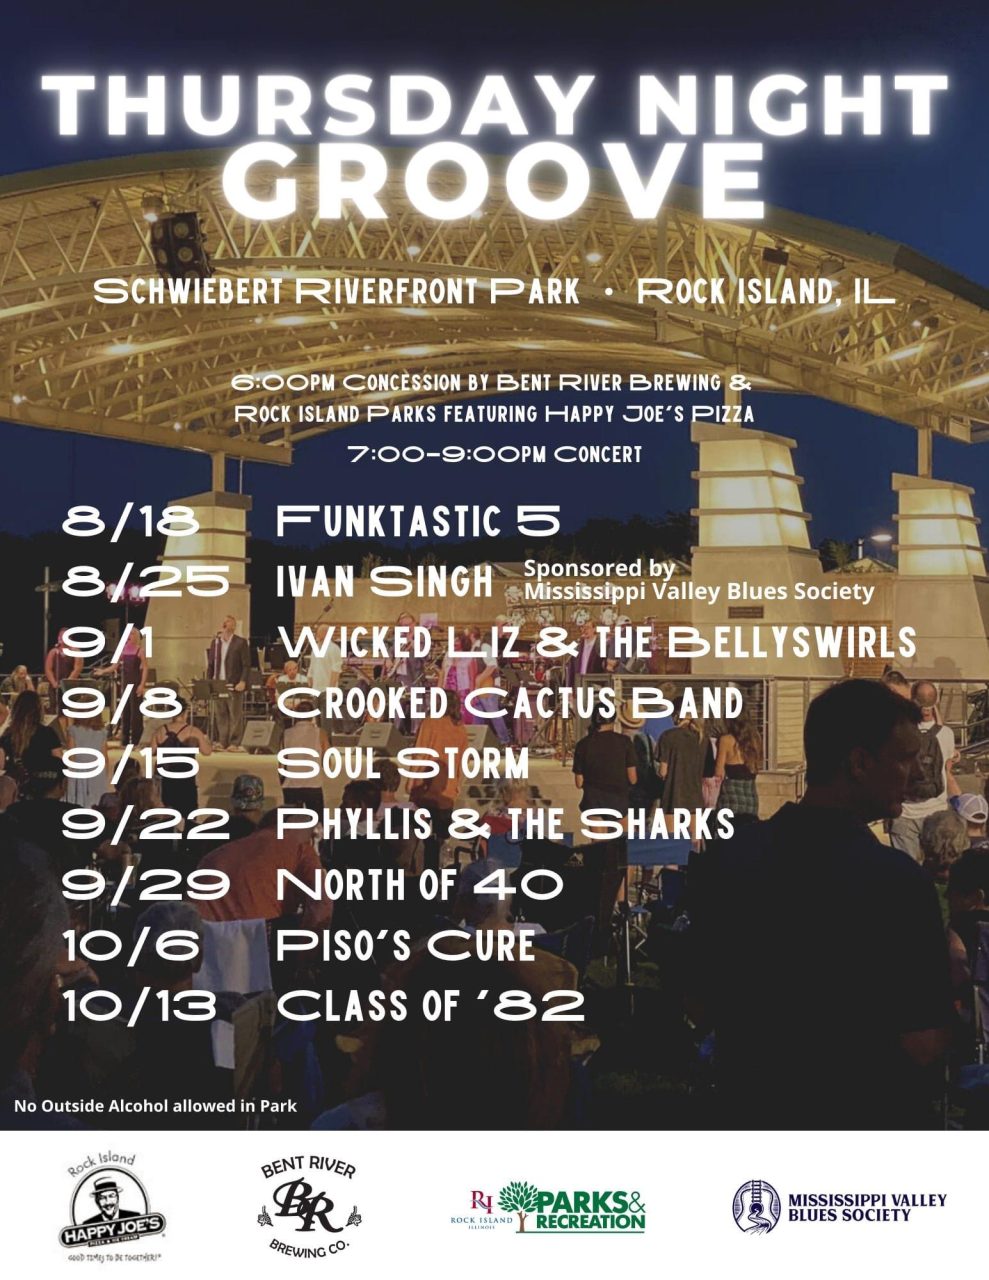 Funktastic 5 Playing Tonight At Thursday Night Groove In Downtown Rock